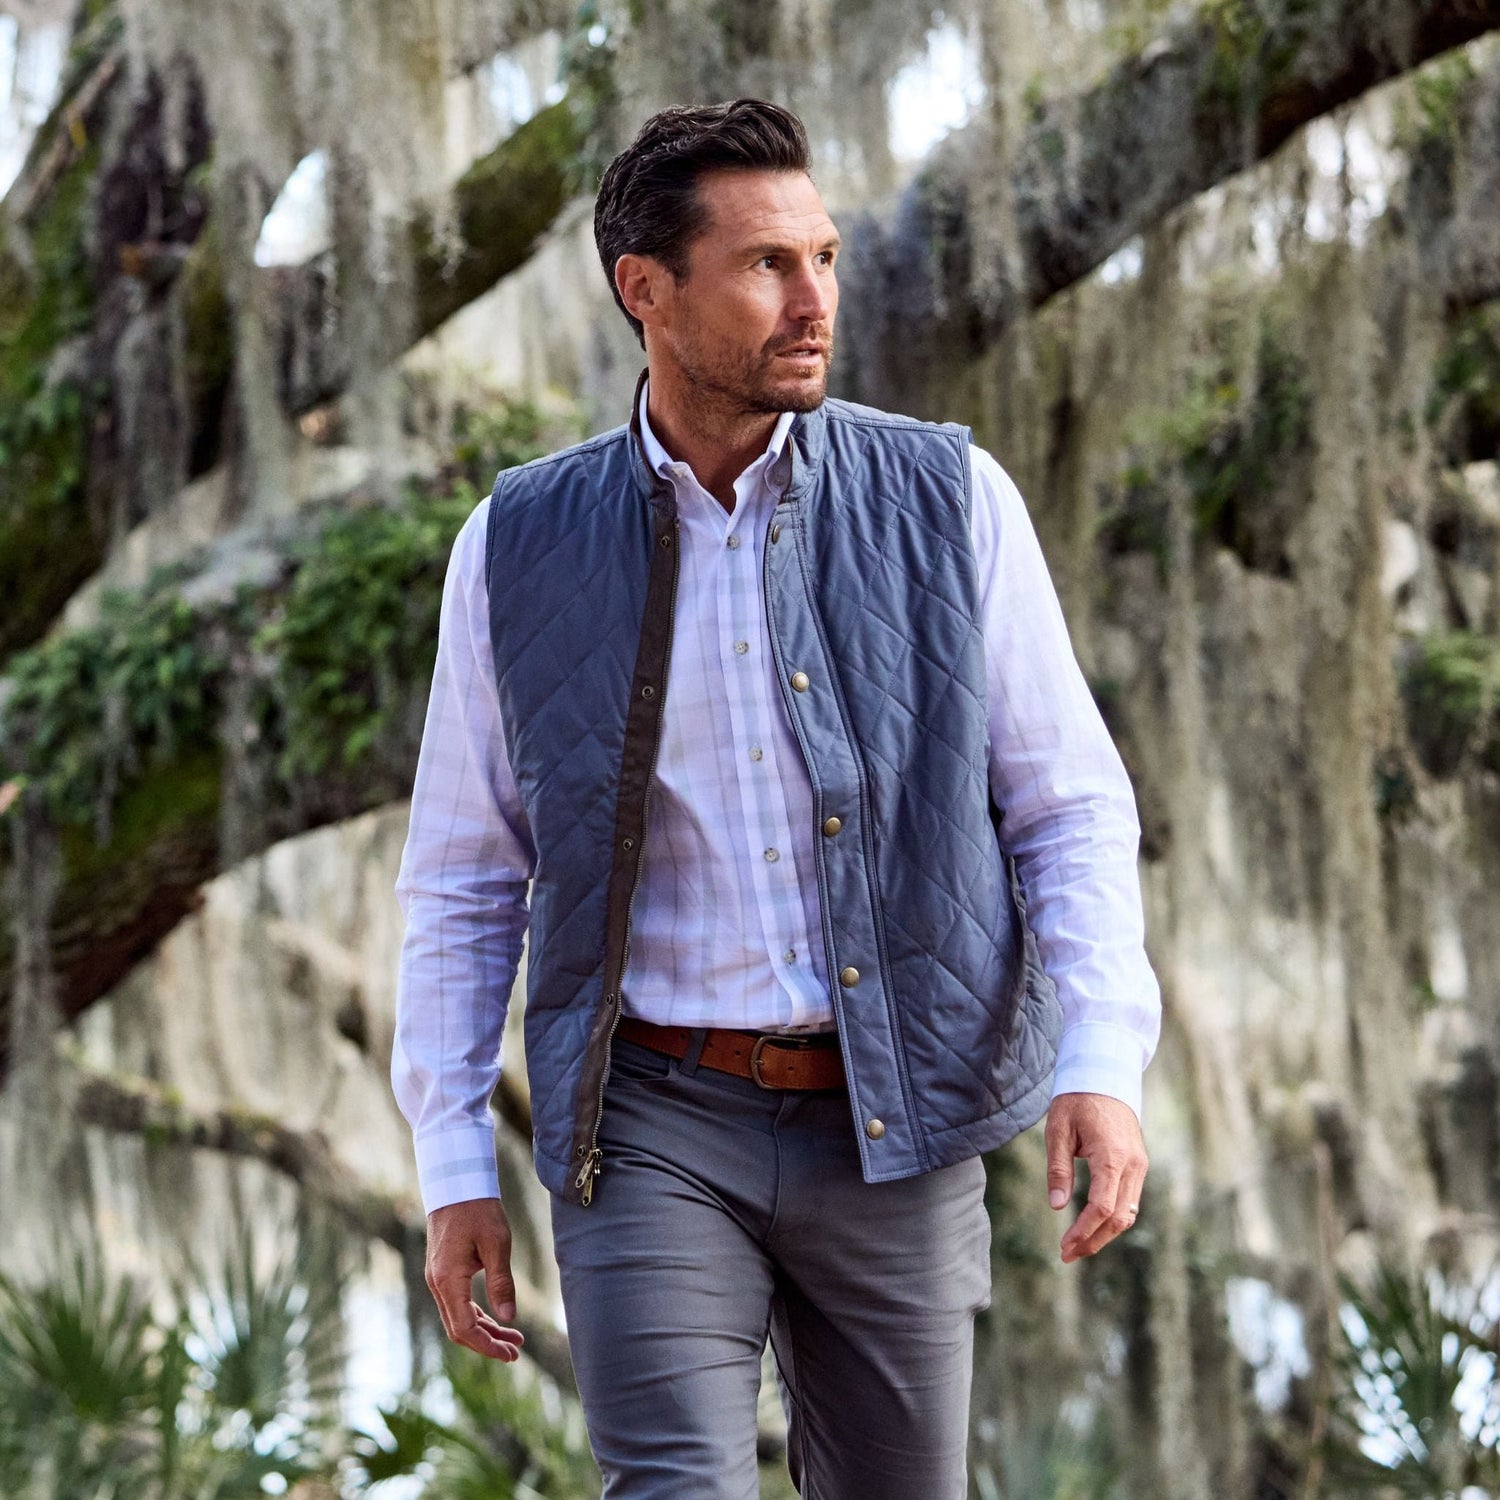 The Quilted Vest